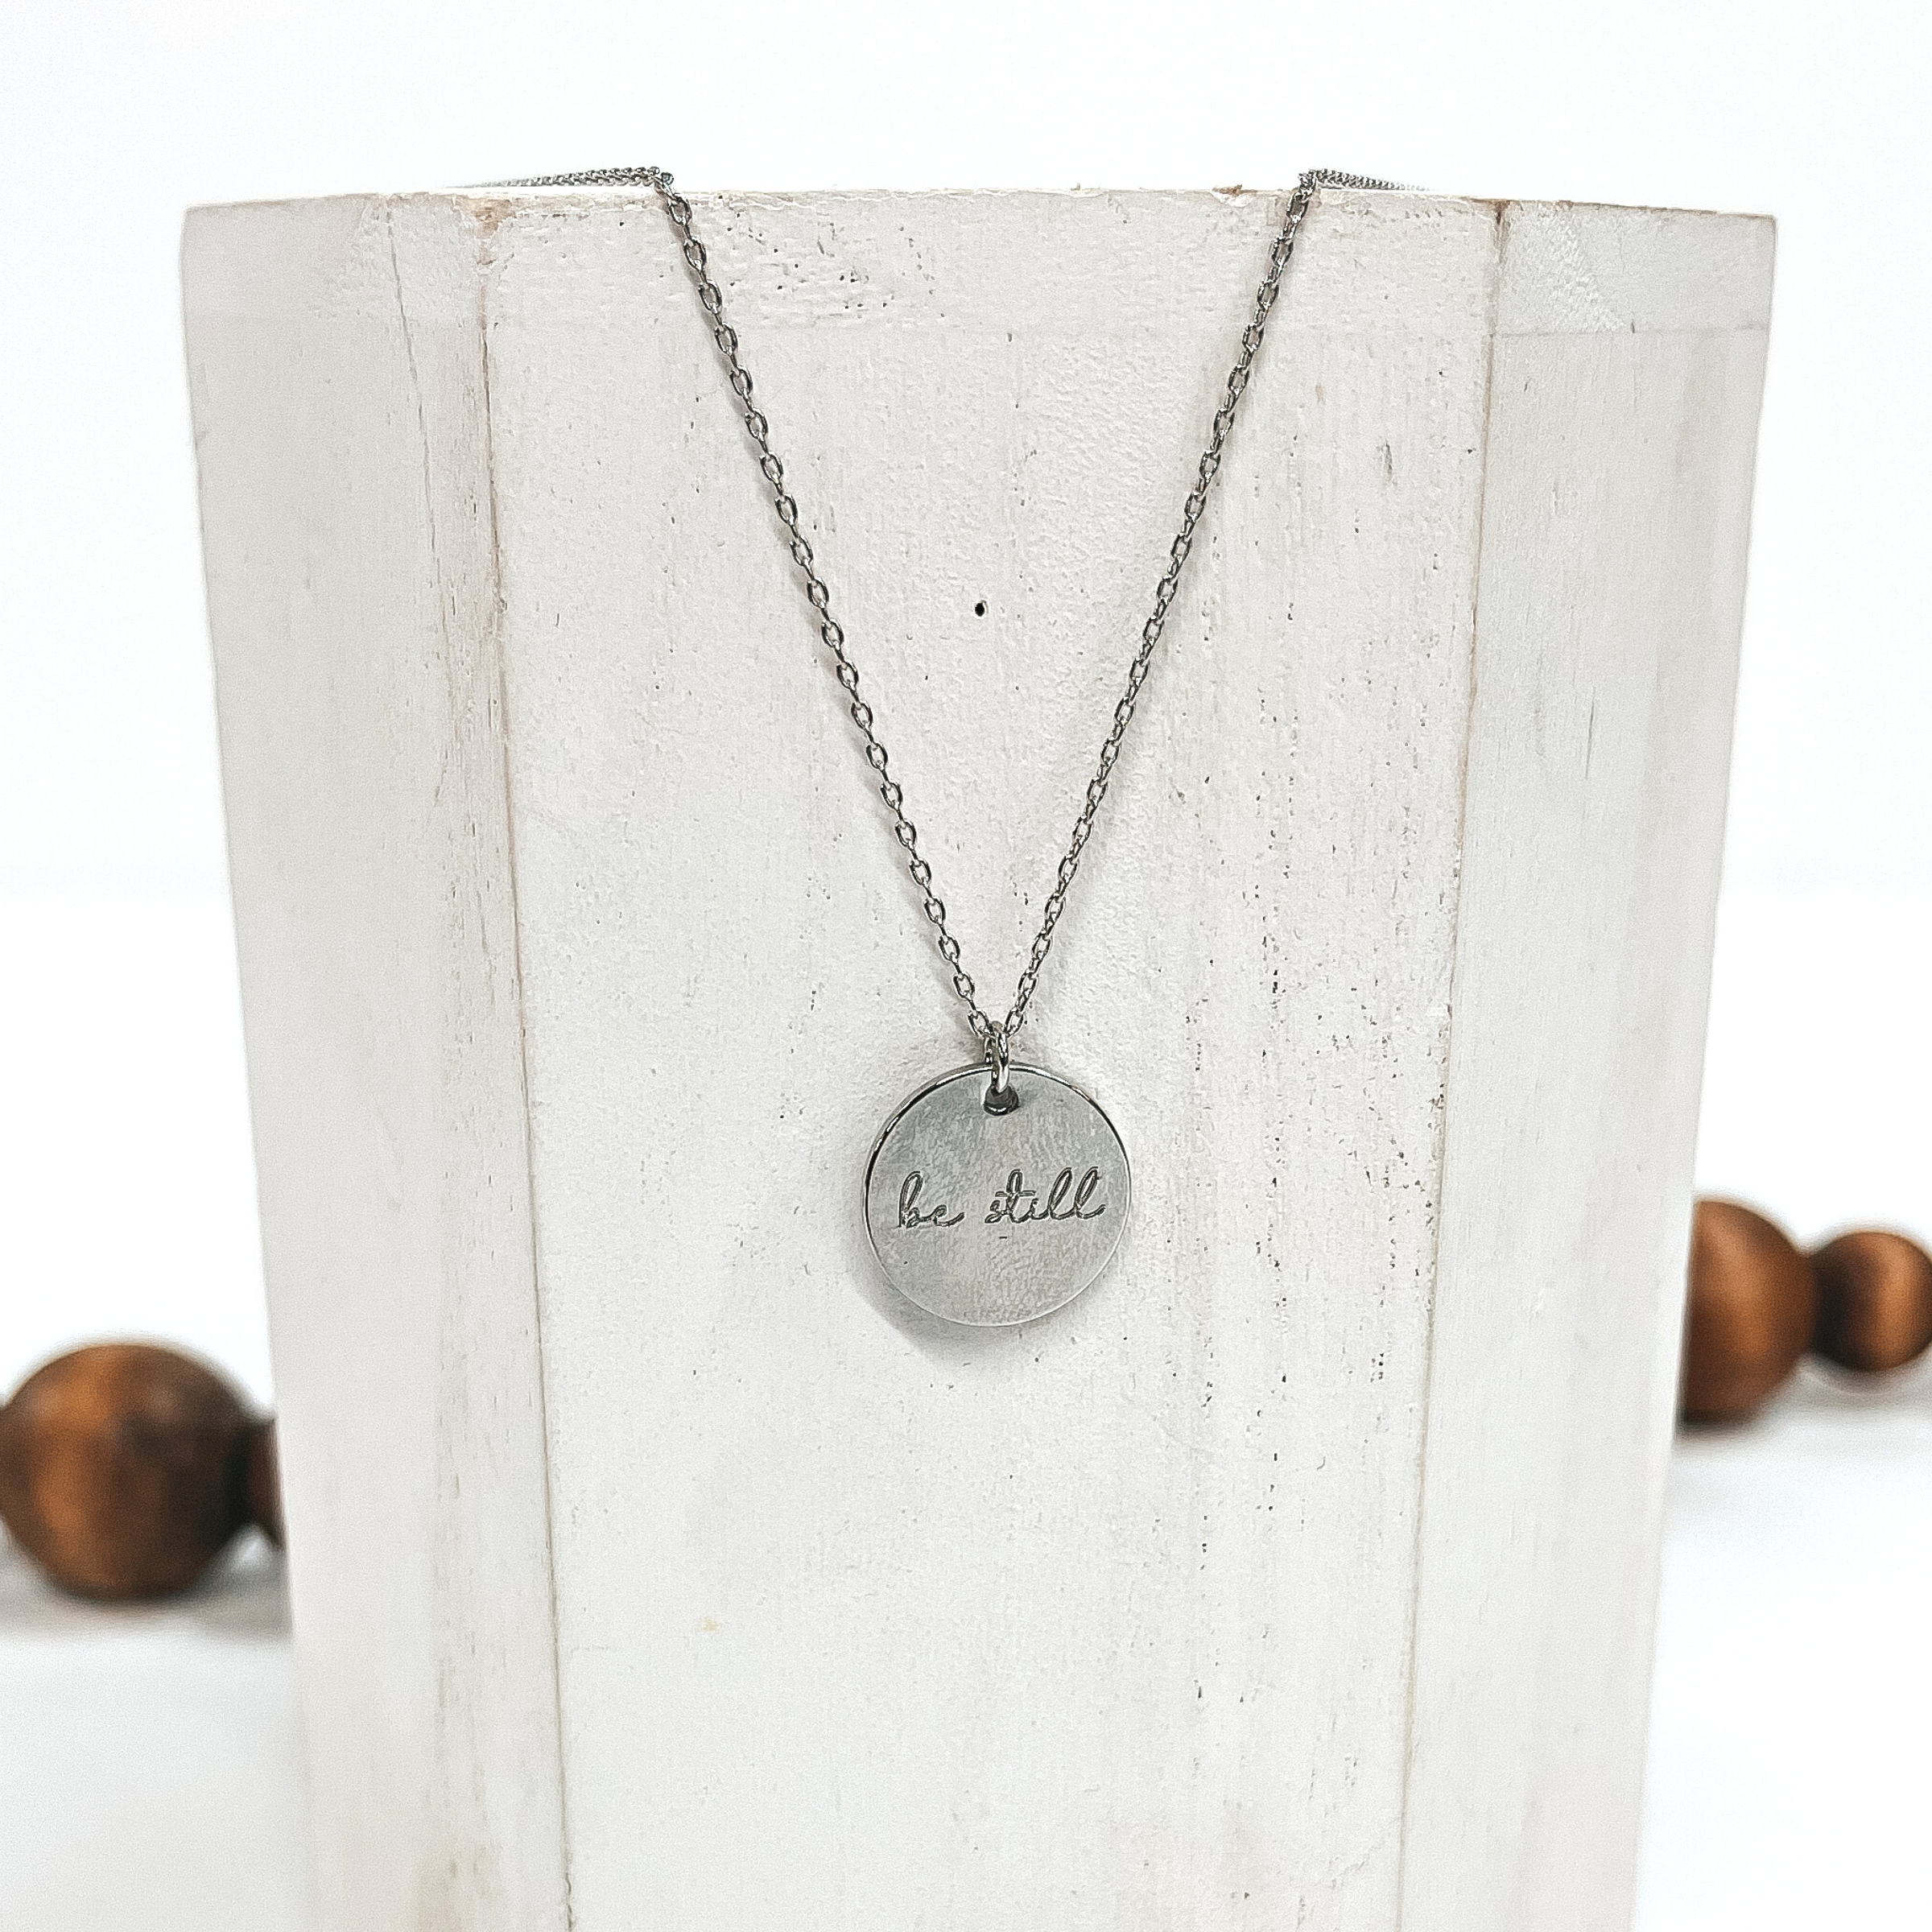 This is a thin silver necklace with a silver pendant that says, 'be still'.  This necklace is taken on a white block and on a white background with brown  beads in the back as decor.